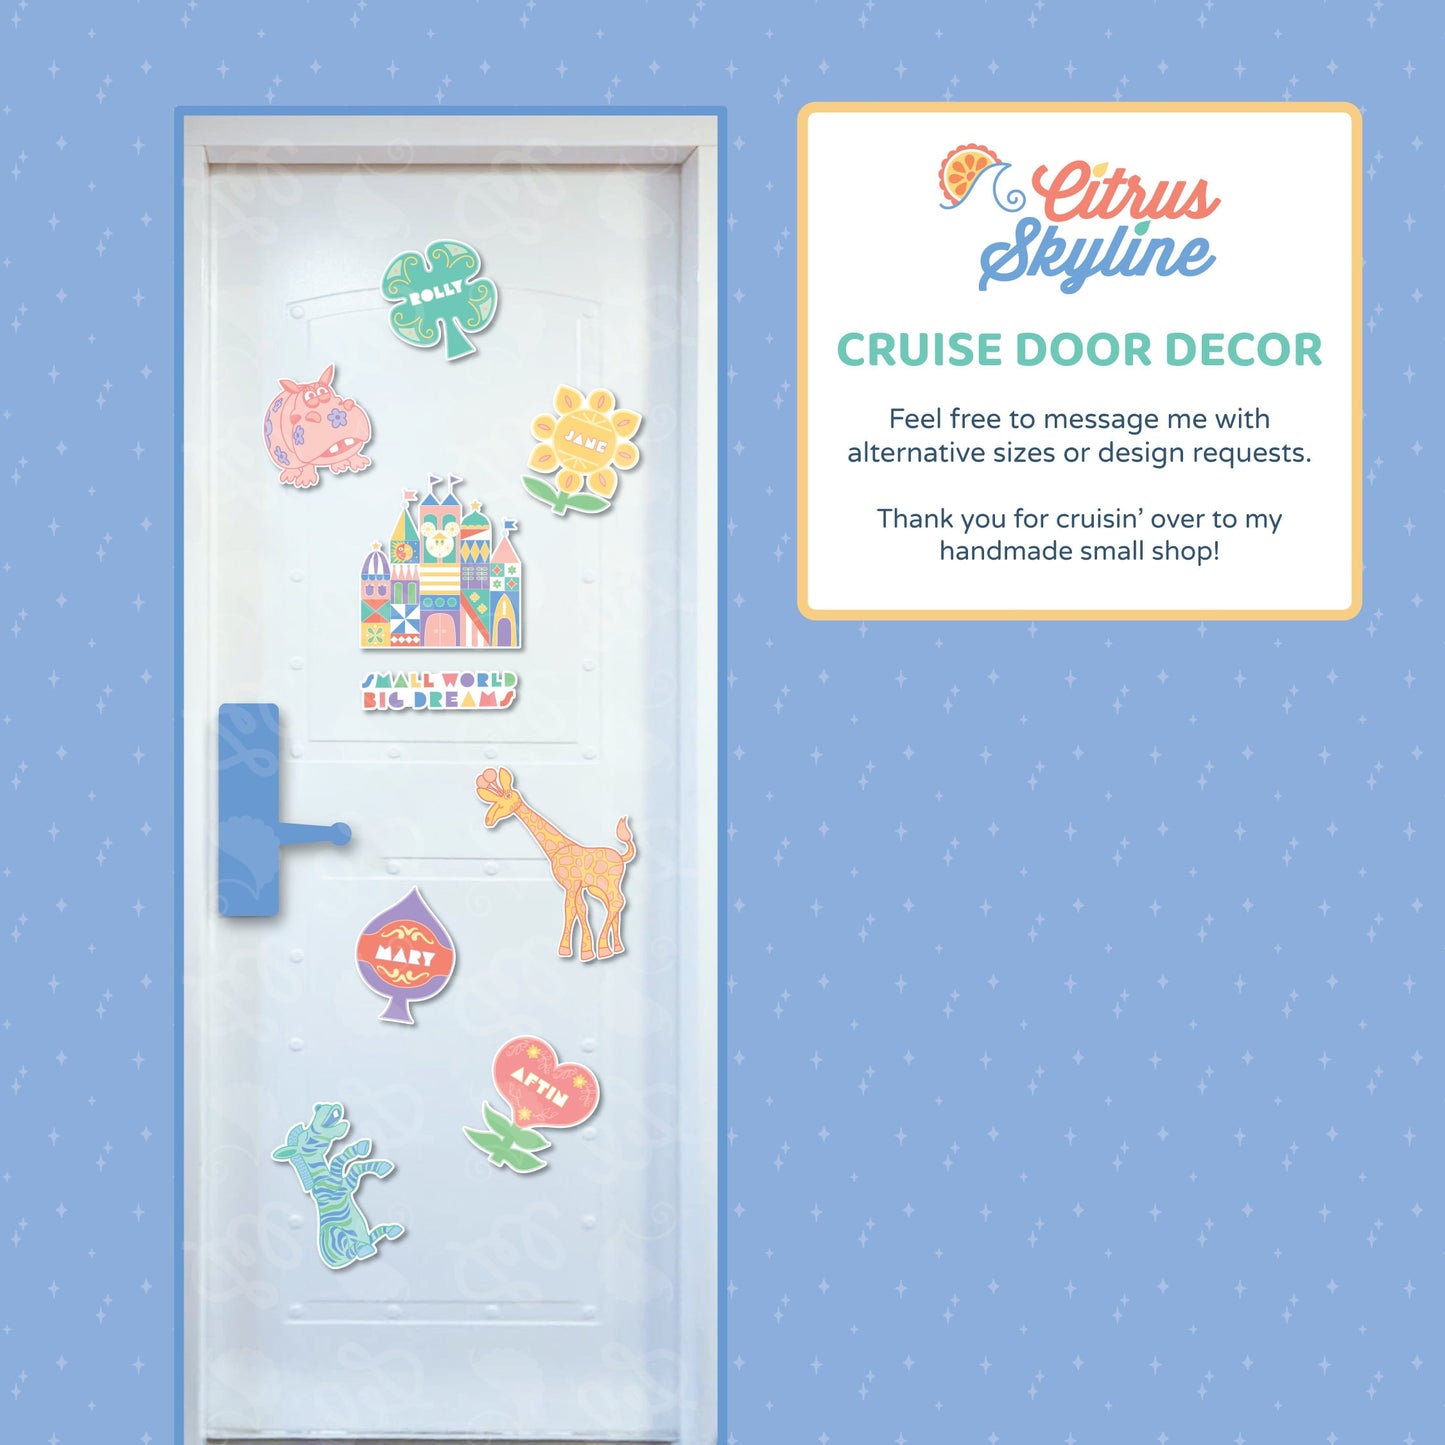 Small World Disney Cruise Magnet Package Theme - Iconic Attraction Cruise, Mary Blair Flowers, Zebra, Hippo, Giraffe